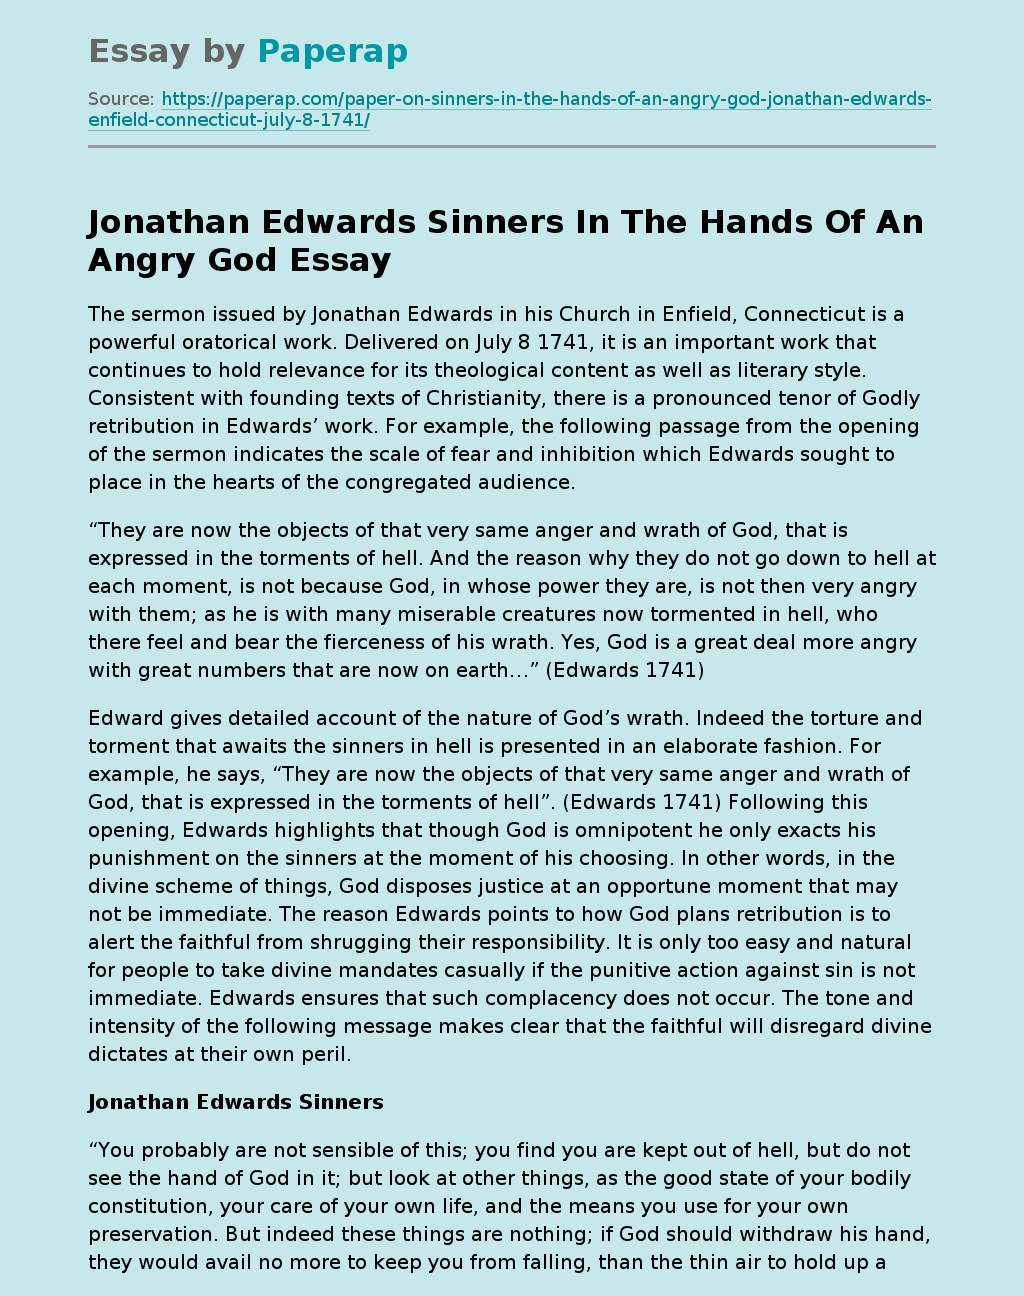 Jonathan Edwards Sinners In The Hands Of An Angry God